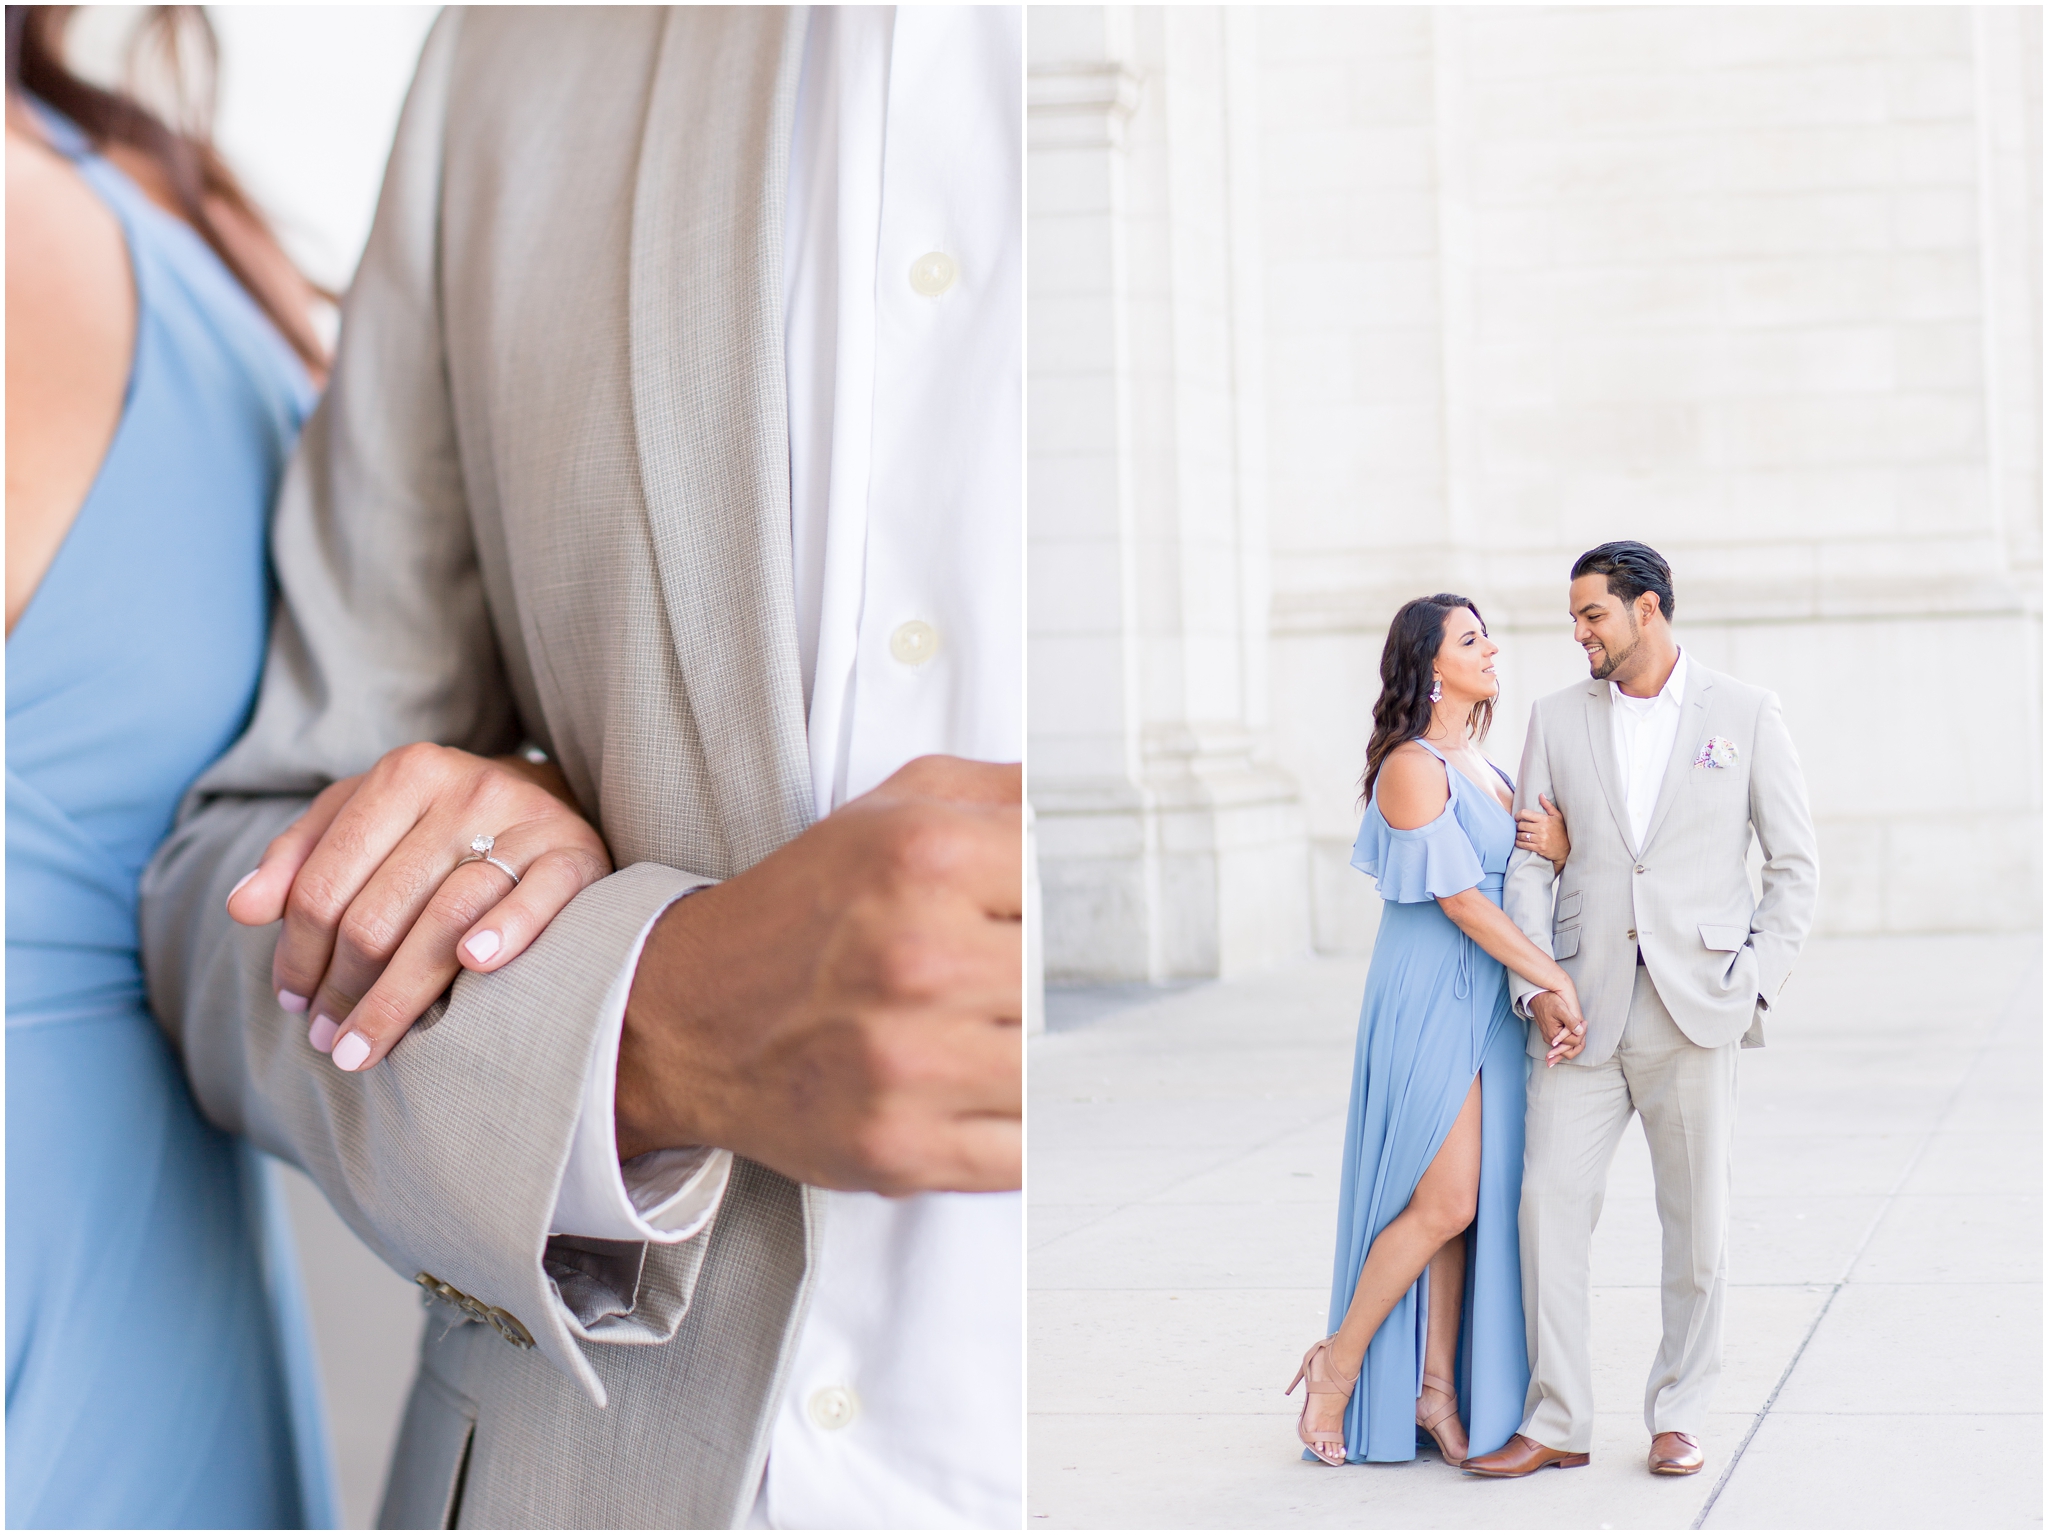 Union Station Wedding photographer captured Union Station engagement session in Washington DC on Capitol Hill. Yvette wore a formal engagement dress from Lulu’s for their formal DC engagement session in the fall. Photographed by DC wedding photographer, Taylor Rose Photography.